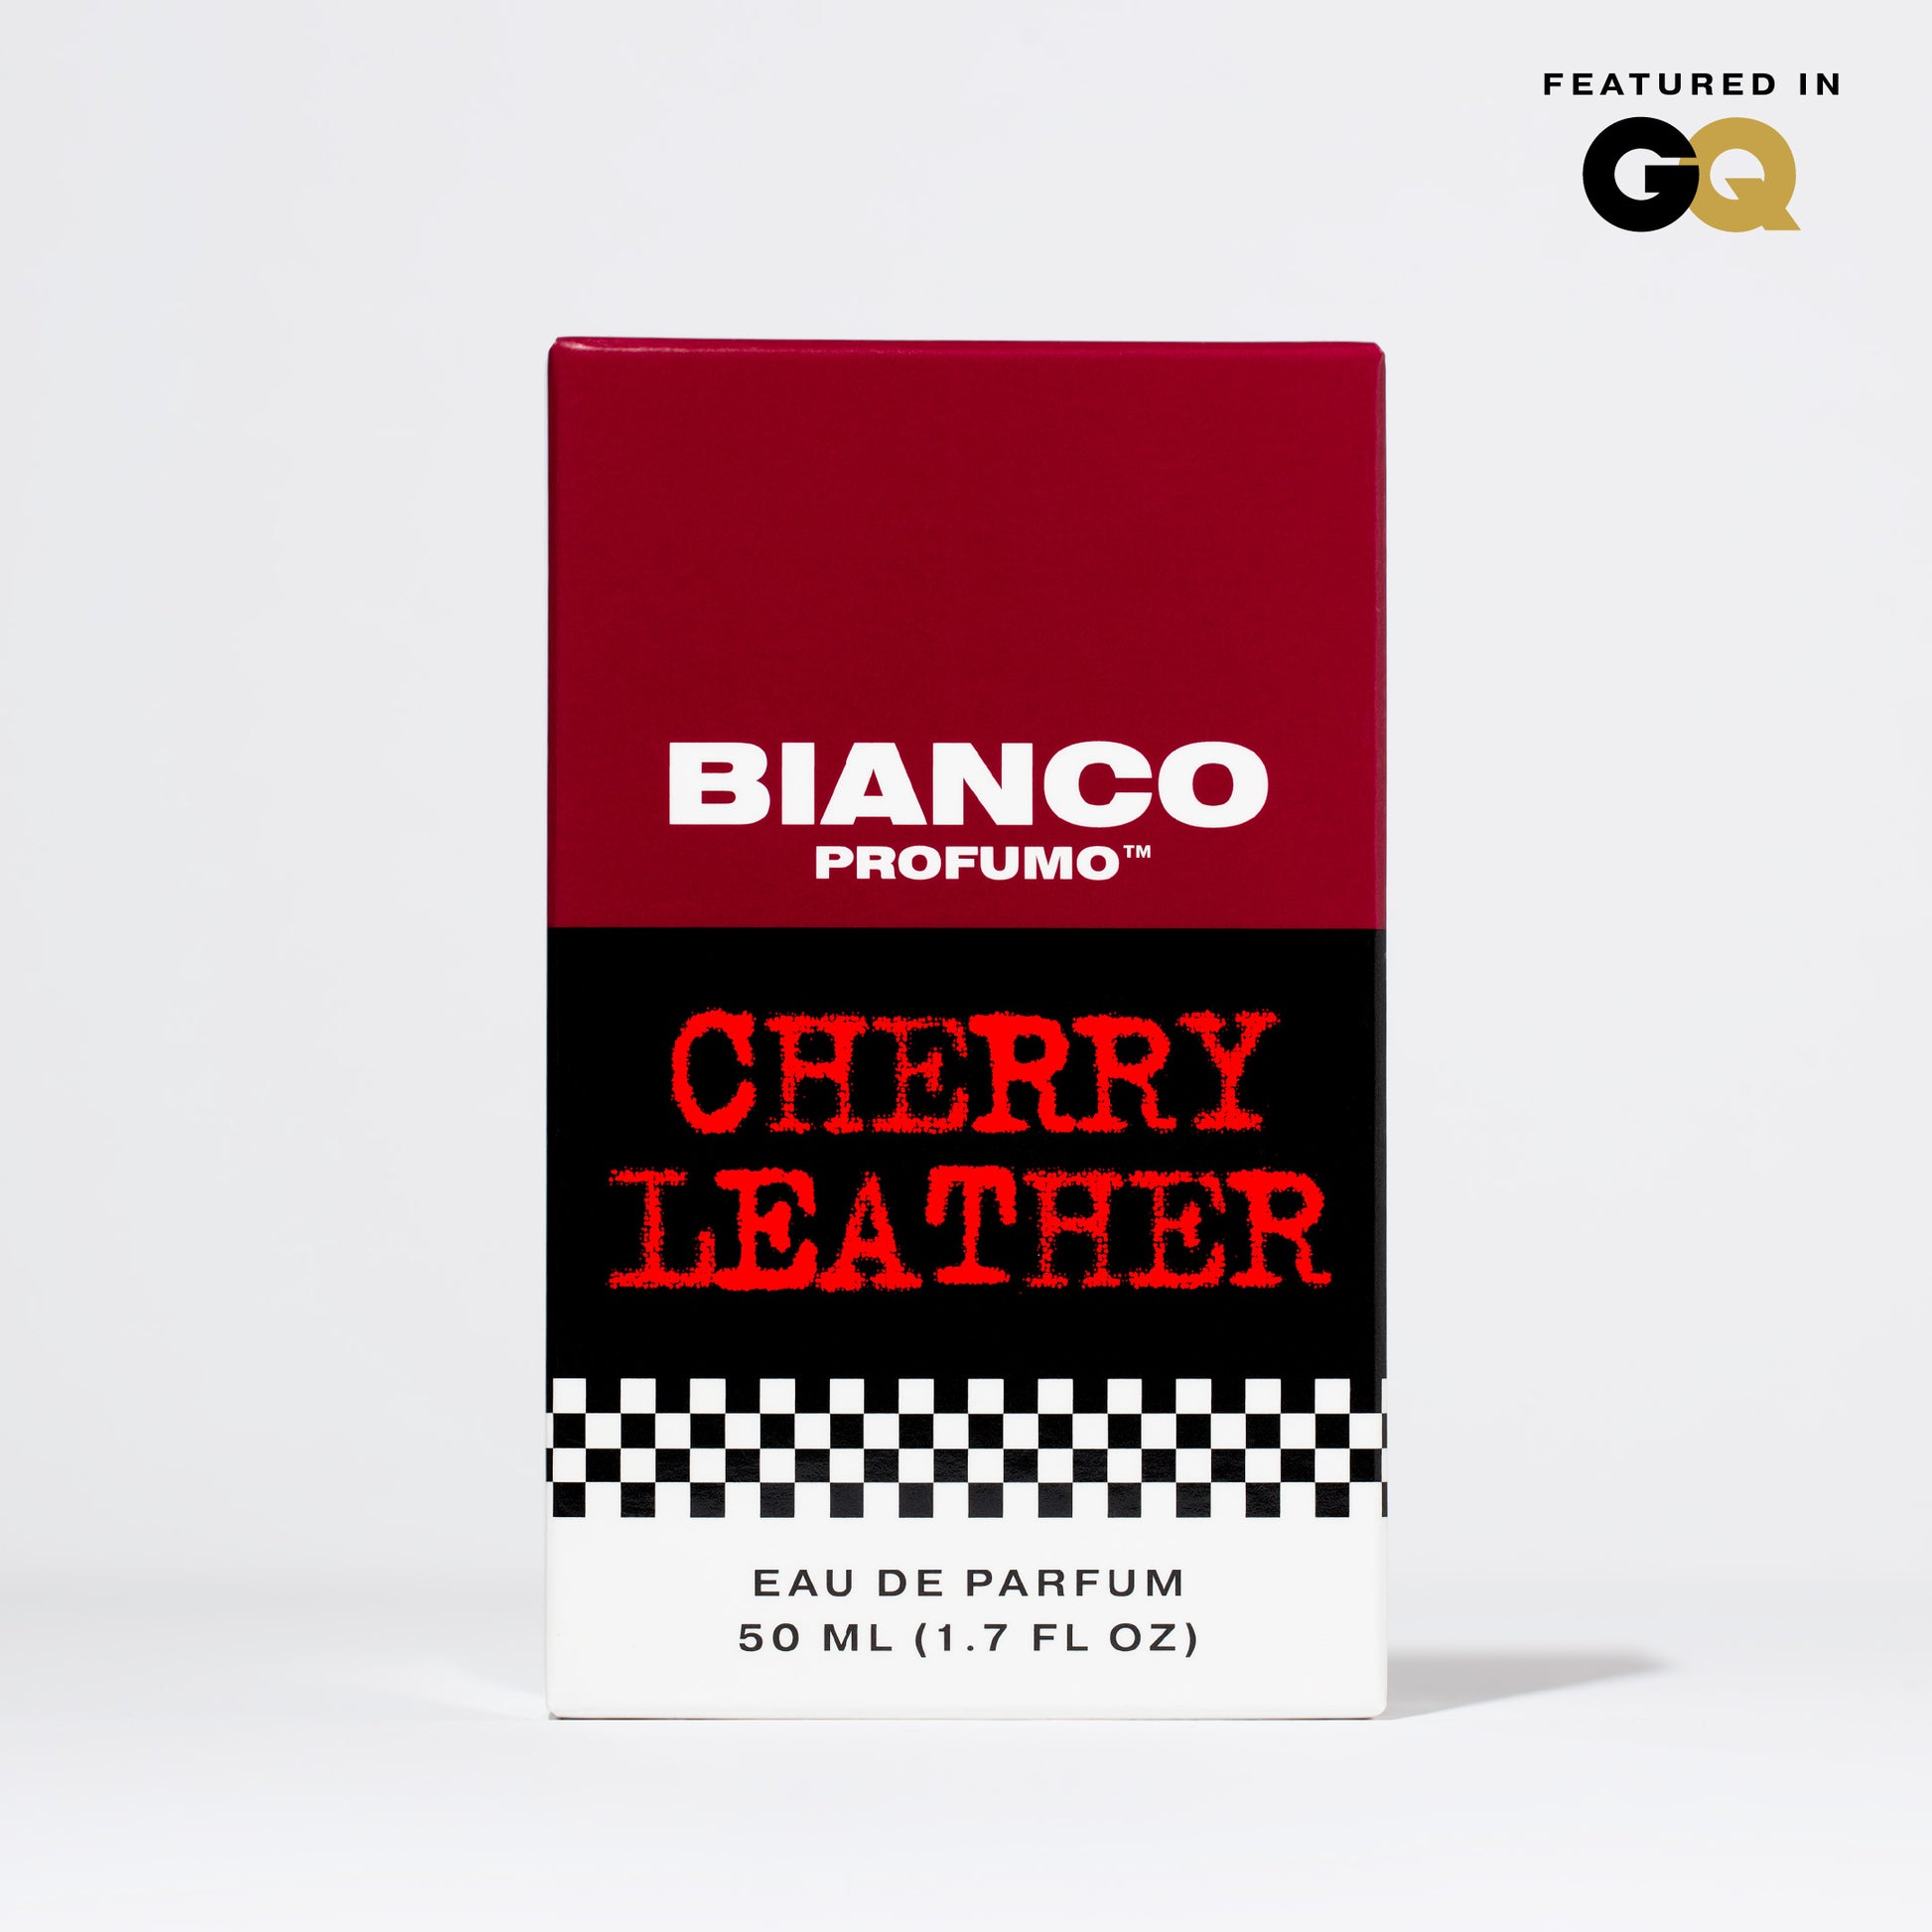 Bianco Profumo Cherry Leather with notes of Bitter Fennel, Star Anise, Black Pepper, Saffron, Ambrette Seed, Cherry, Bitter Almond, Guaiacwood, Pine Tar, Suede, Amber, Oakwood, Moss, and Musk. Box on clean white background.